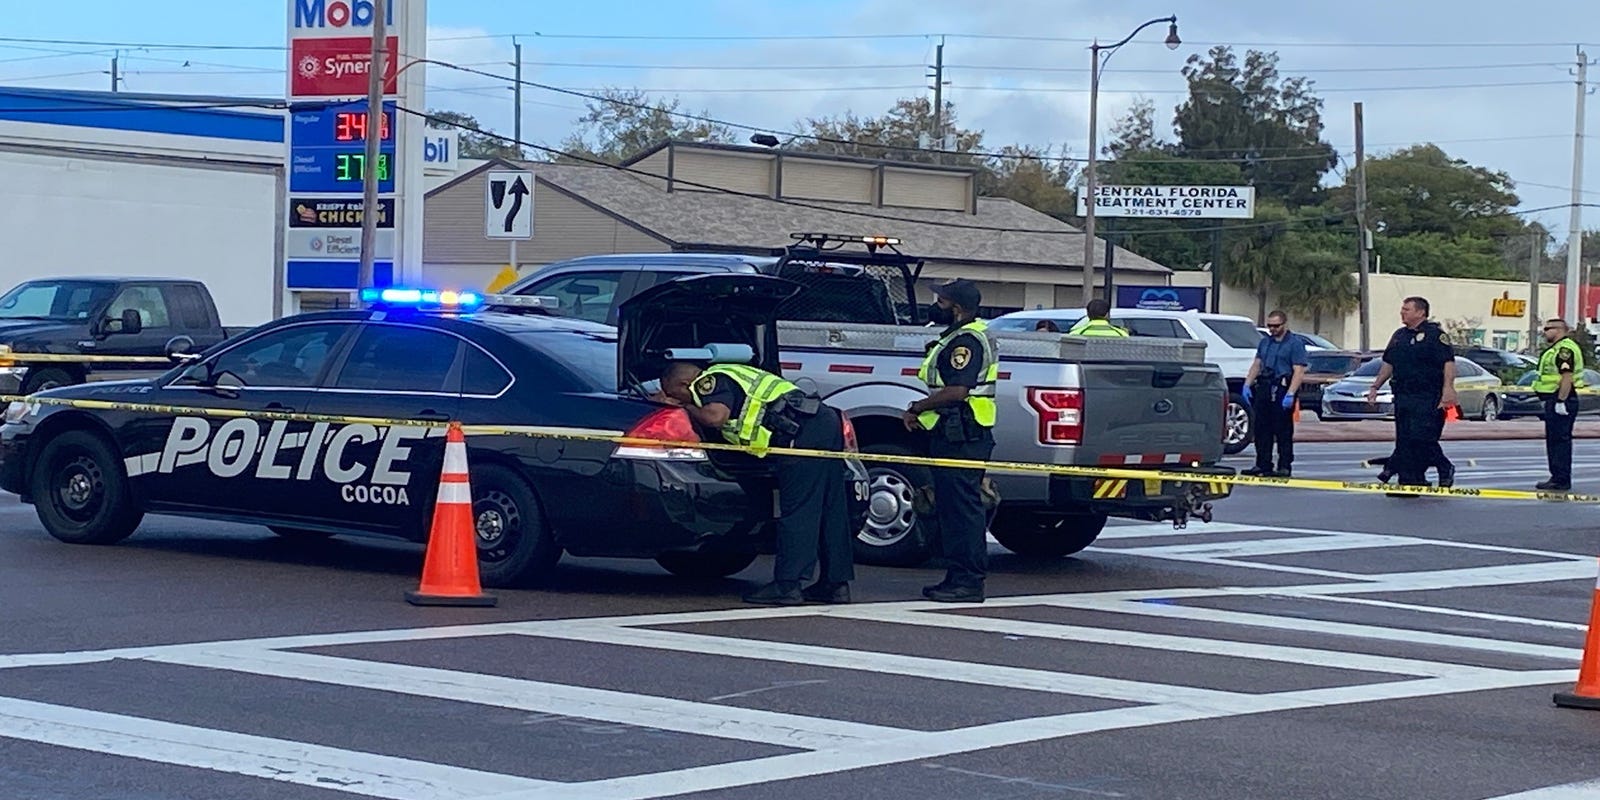 pedestrian hit by car yesterday in florida